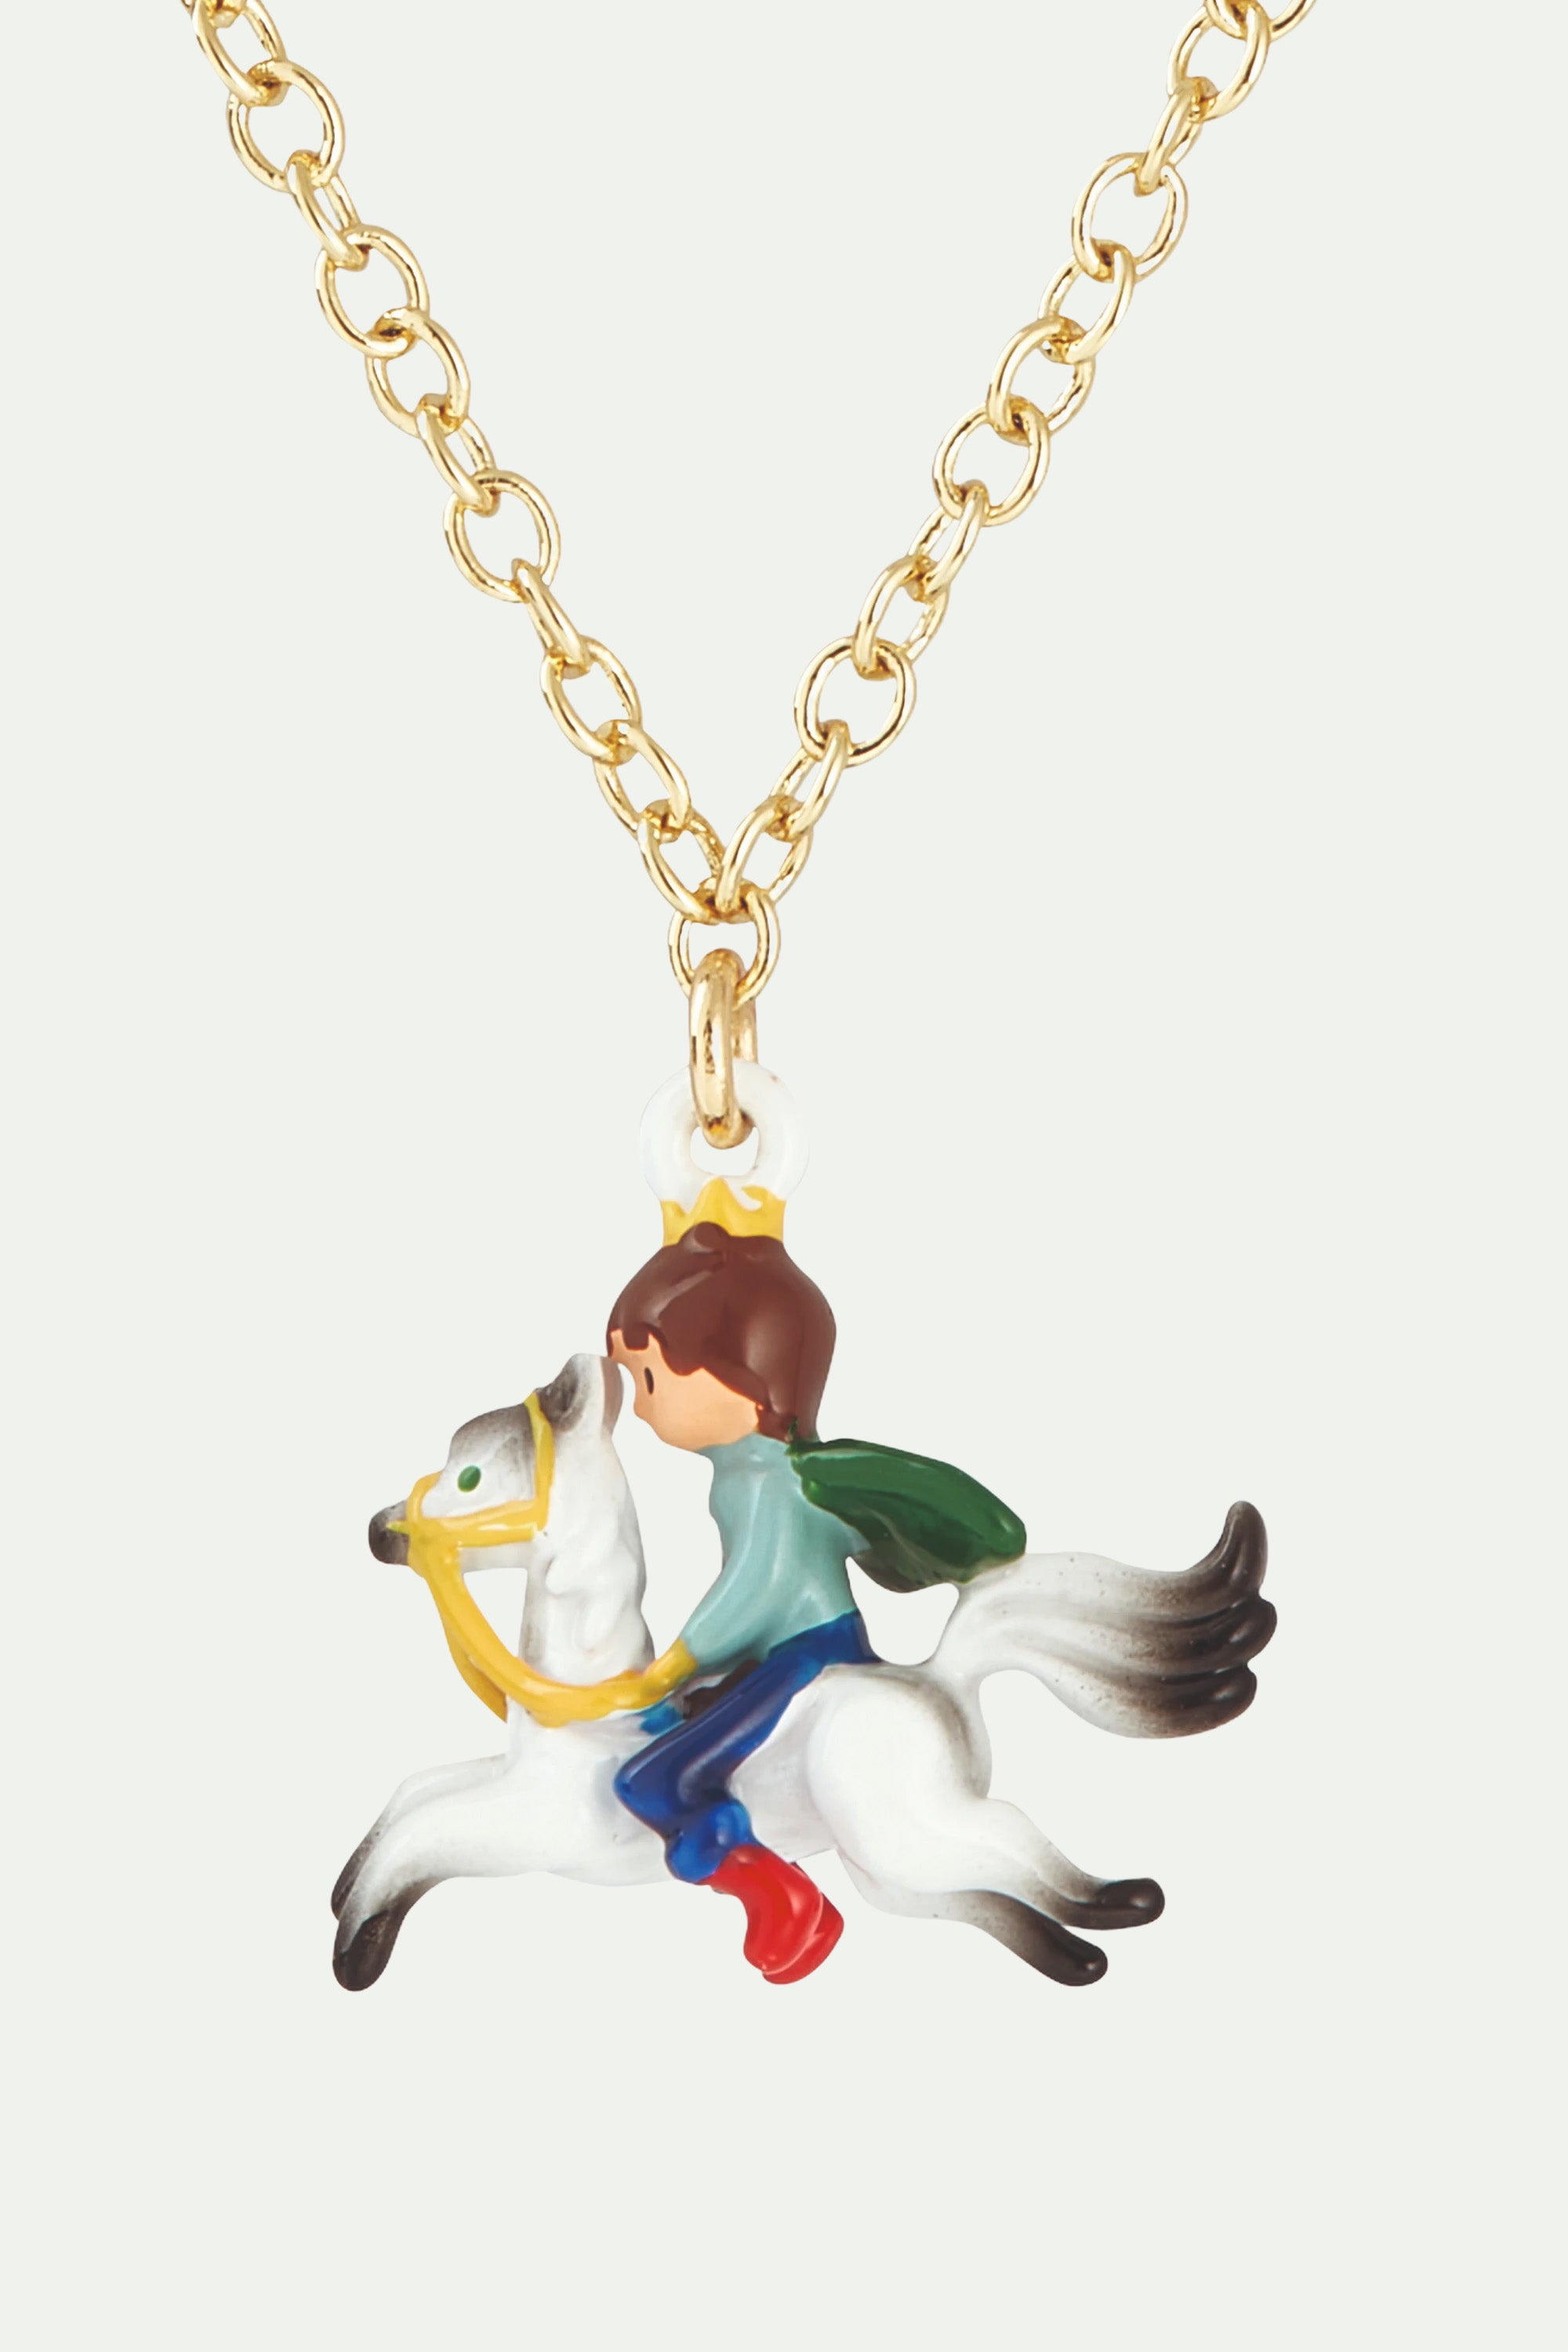 Enchanted hair princess and prince charm necklace